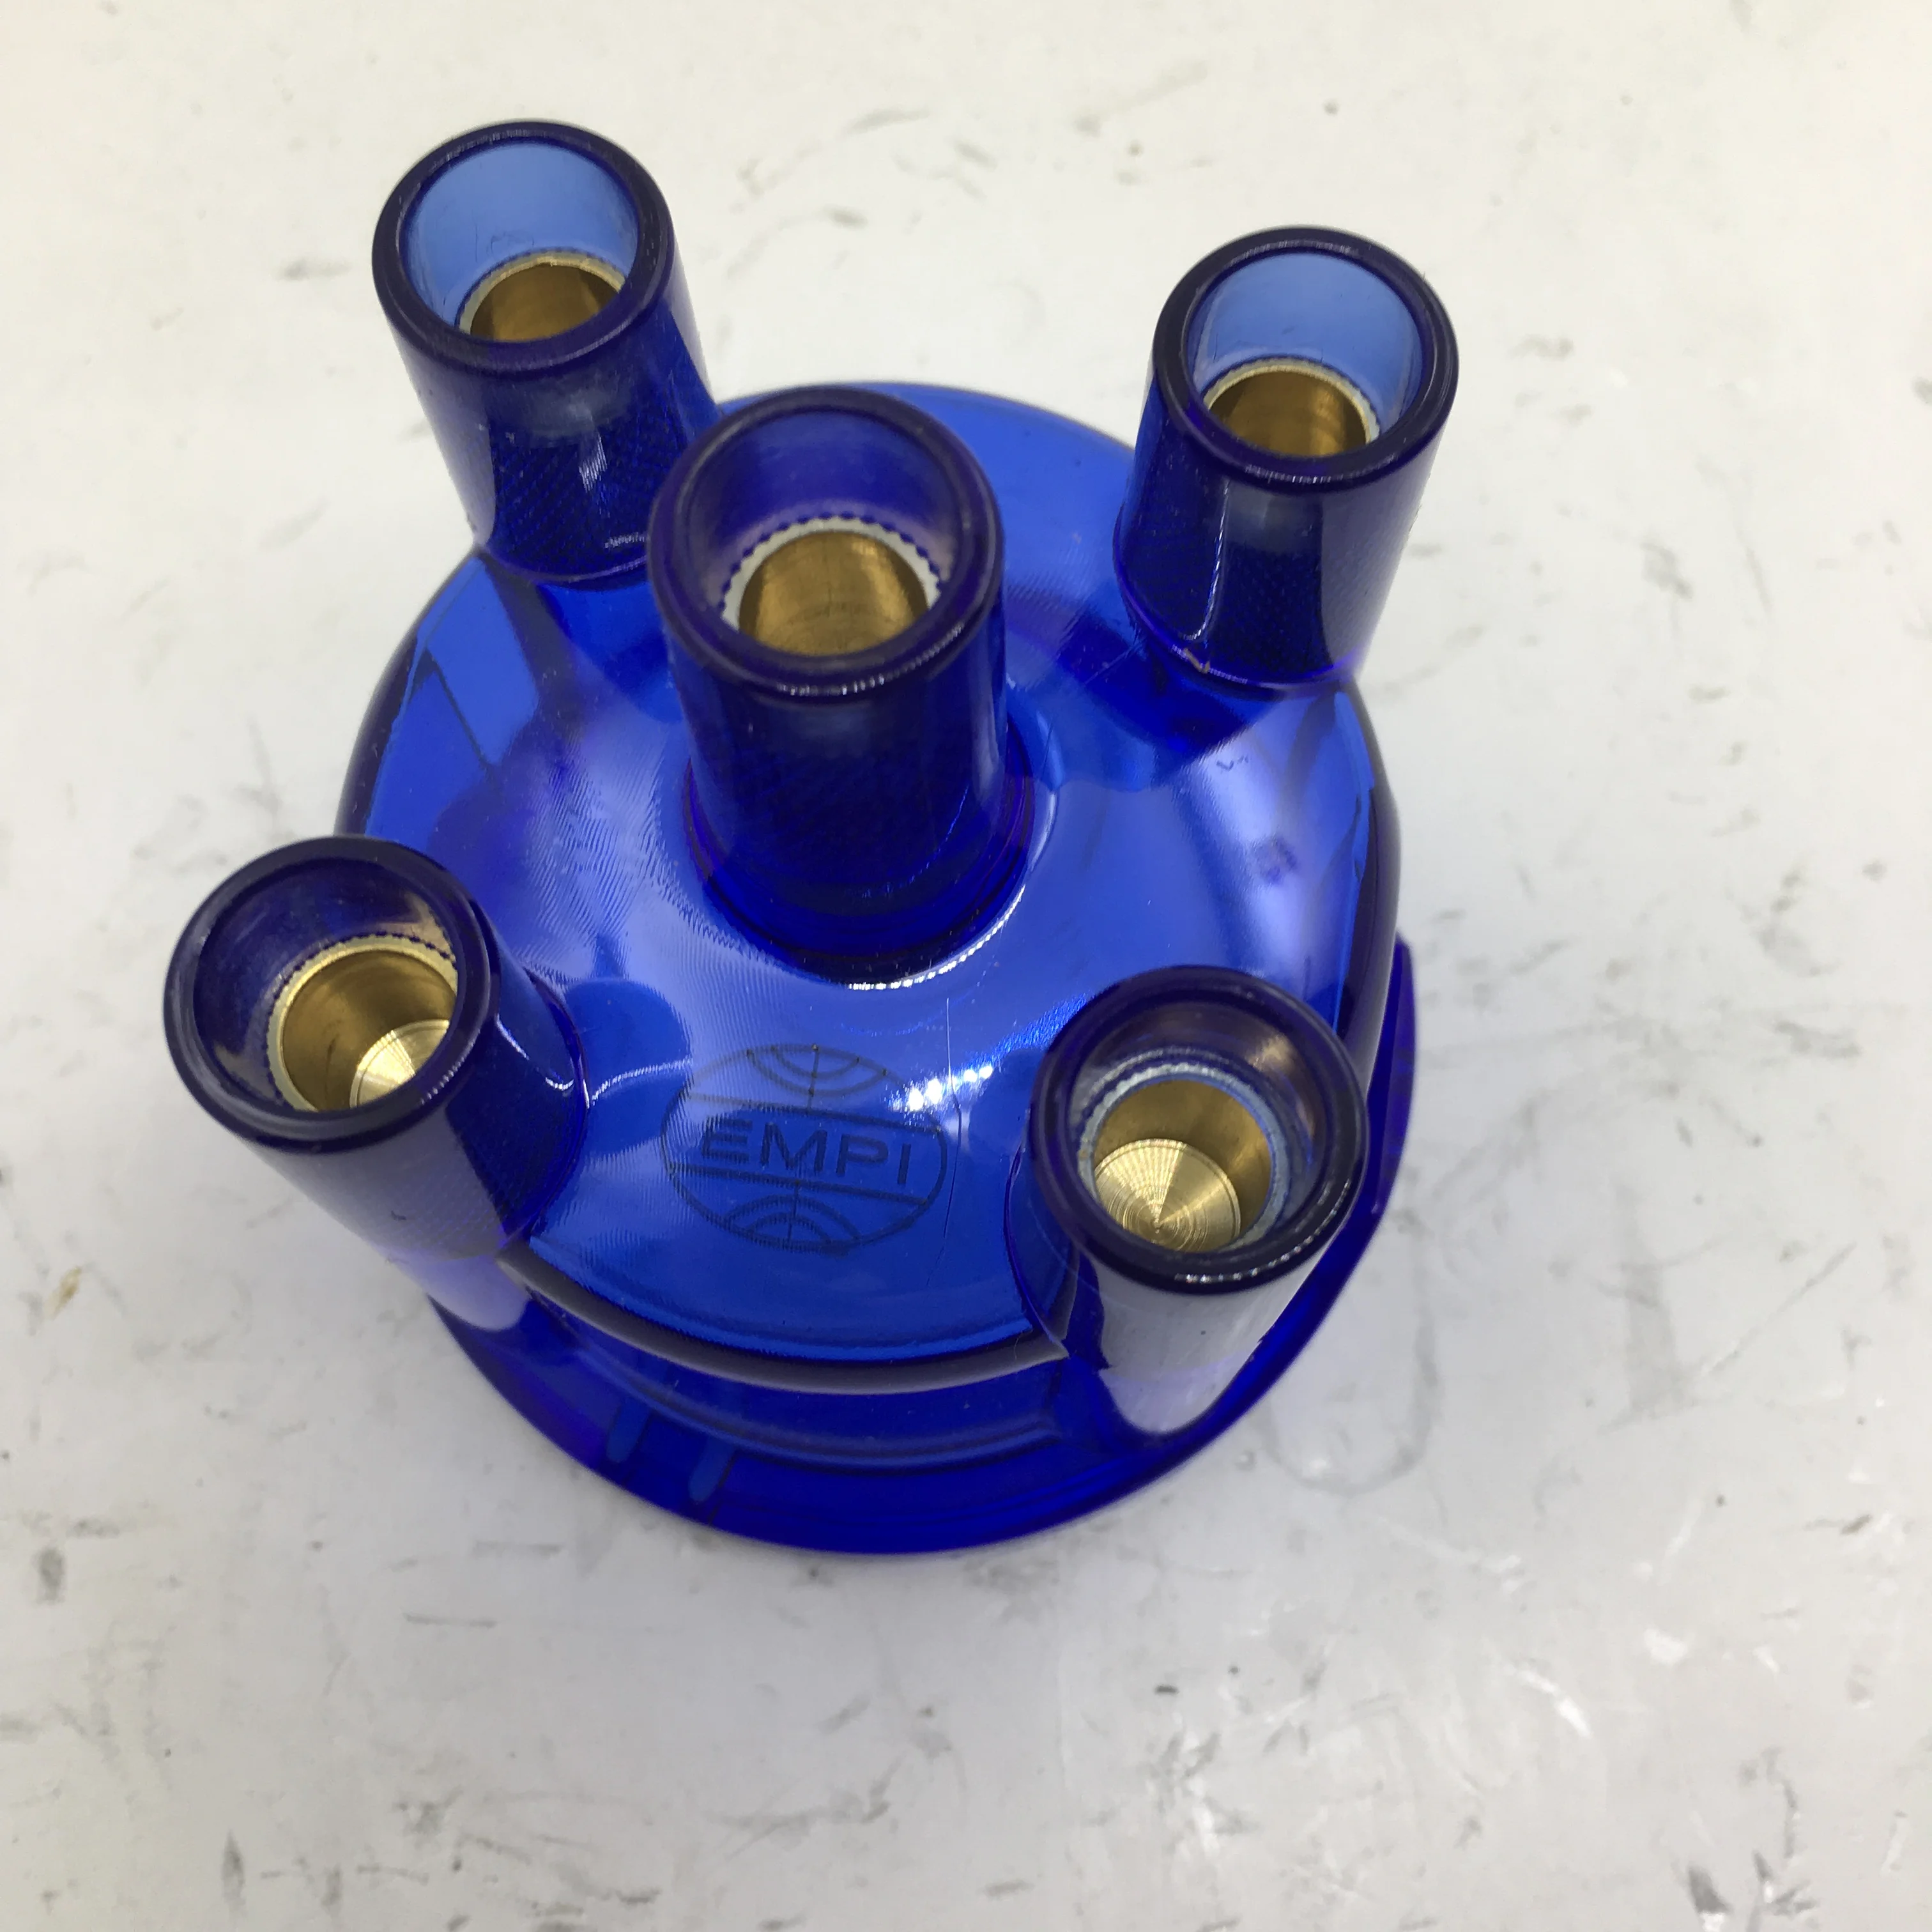 

SherryBerg DISTRIBUTOR CAP for EMPI BLUE TRANSPARENT 009 for VW DUNE BUGGY BUG GHIA THING BAJA Free Shipping